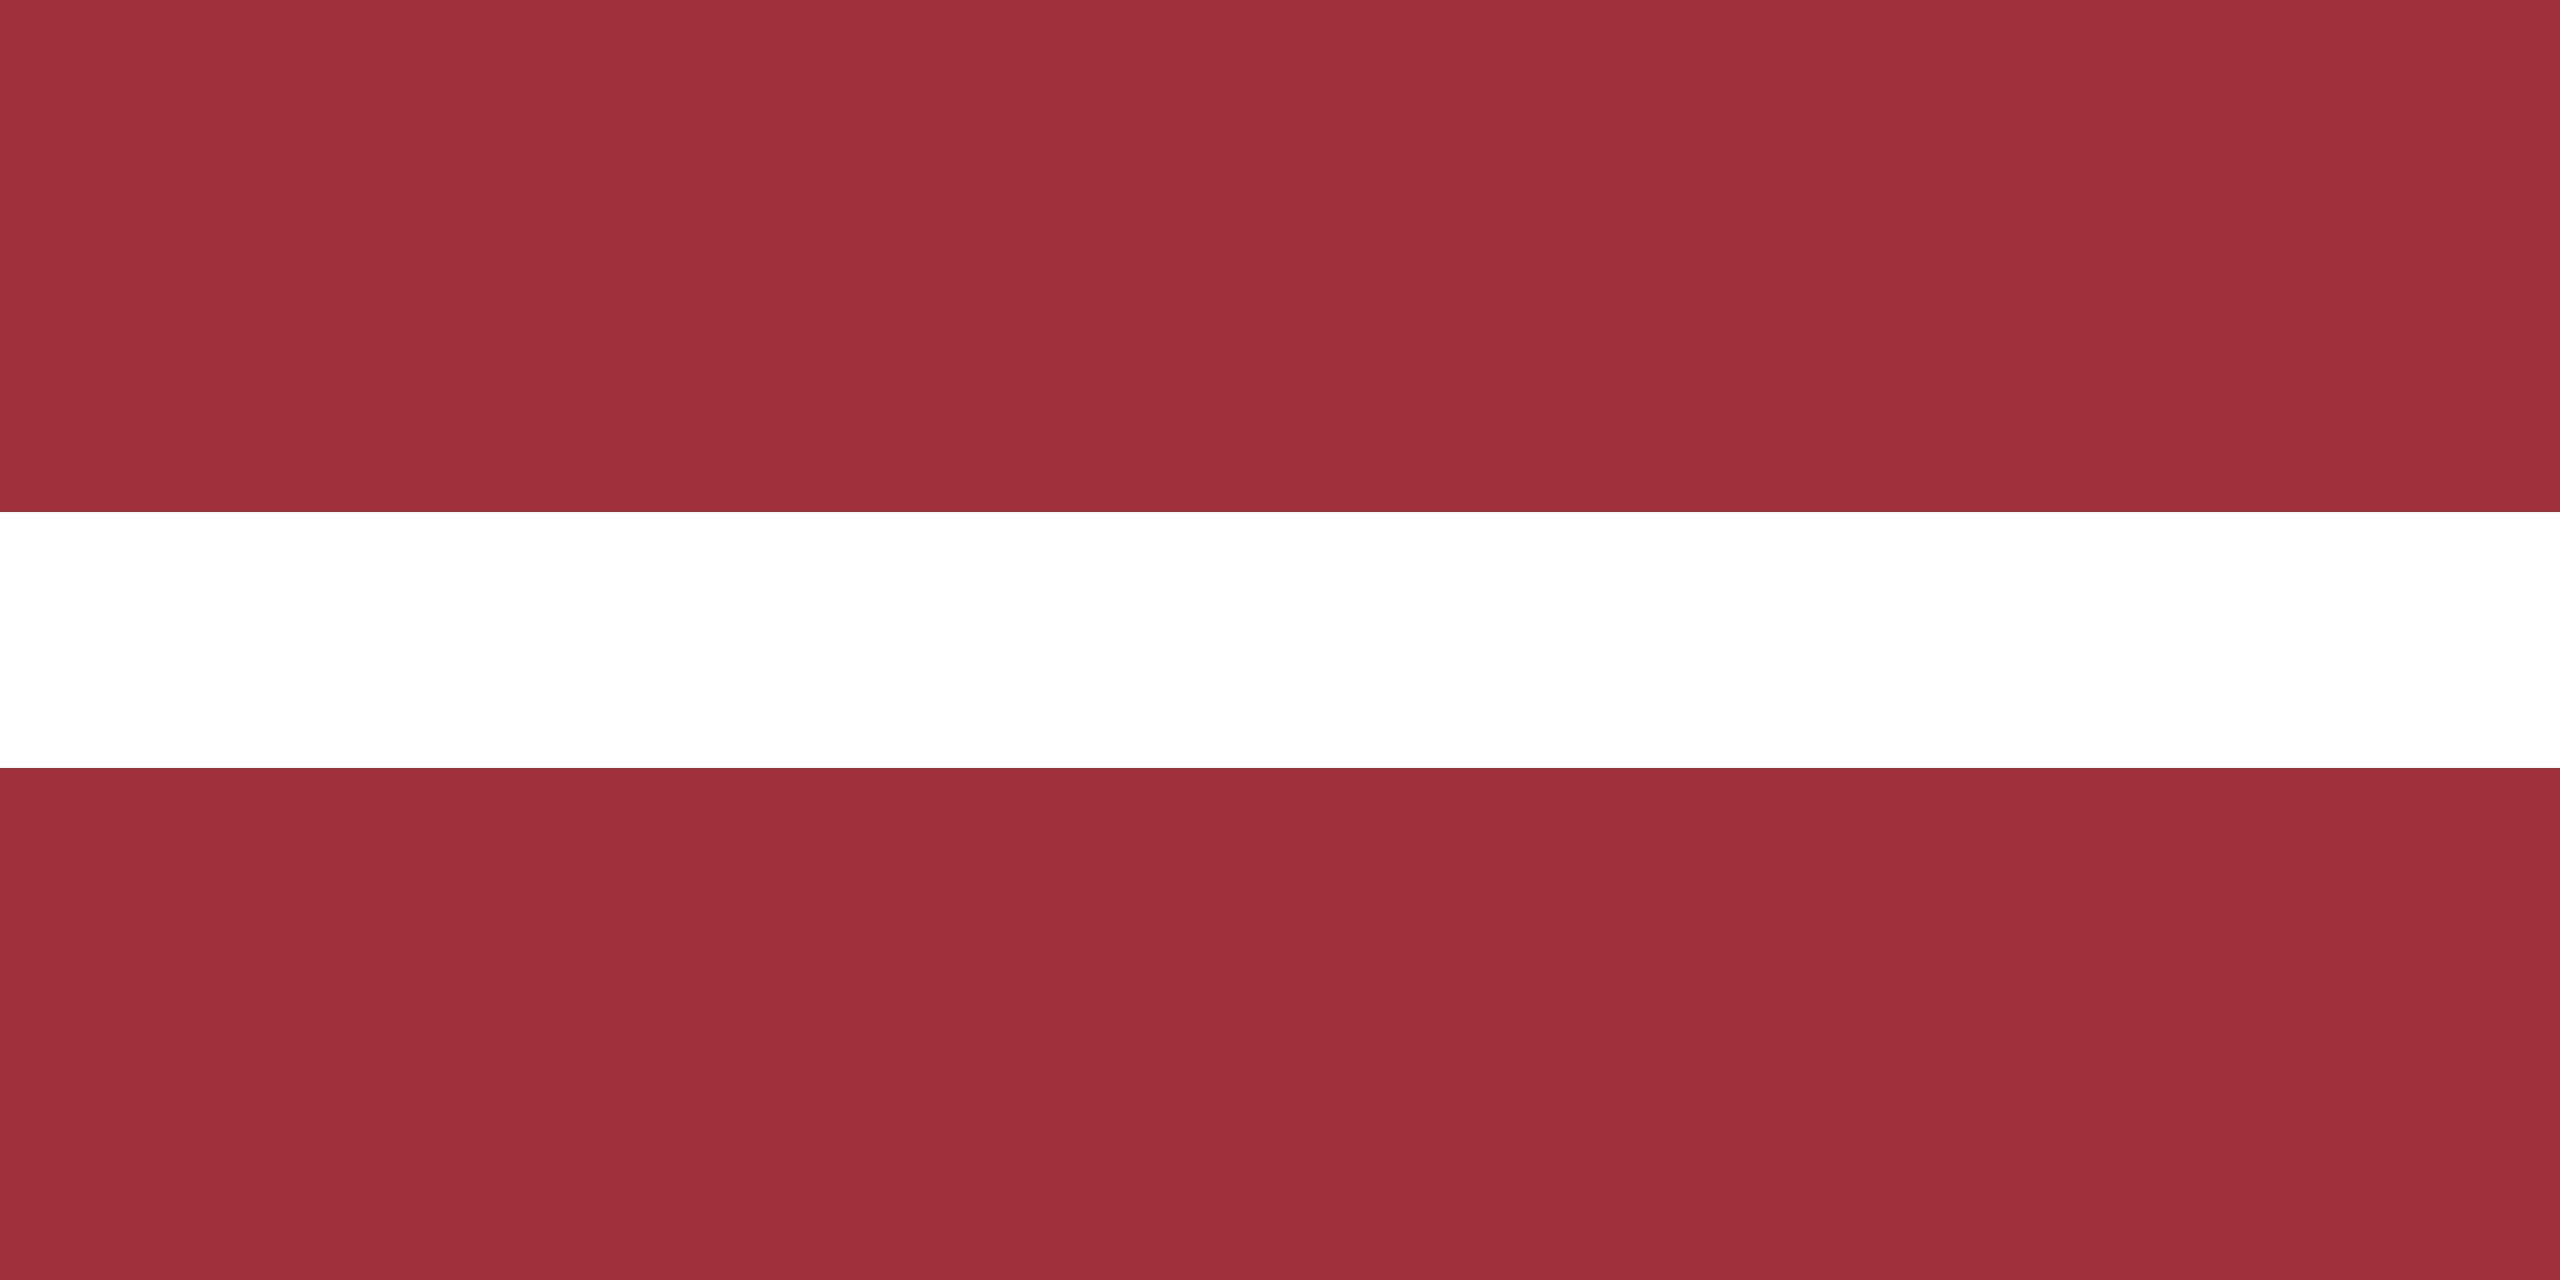 Facts of Latvia